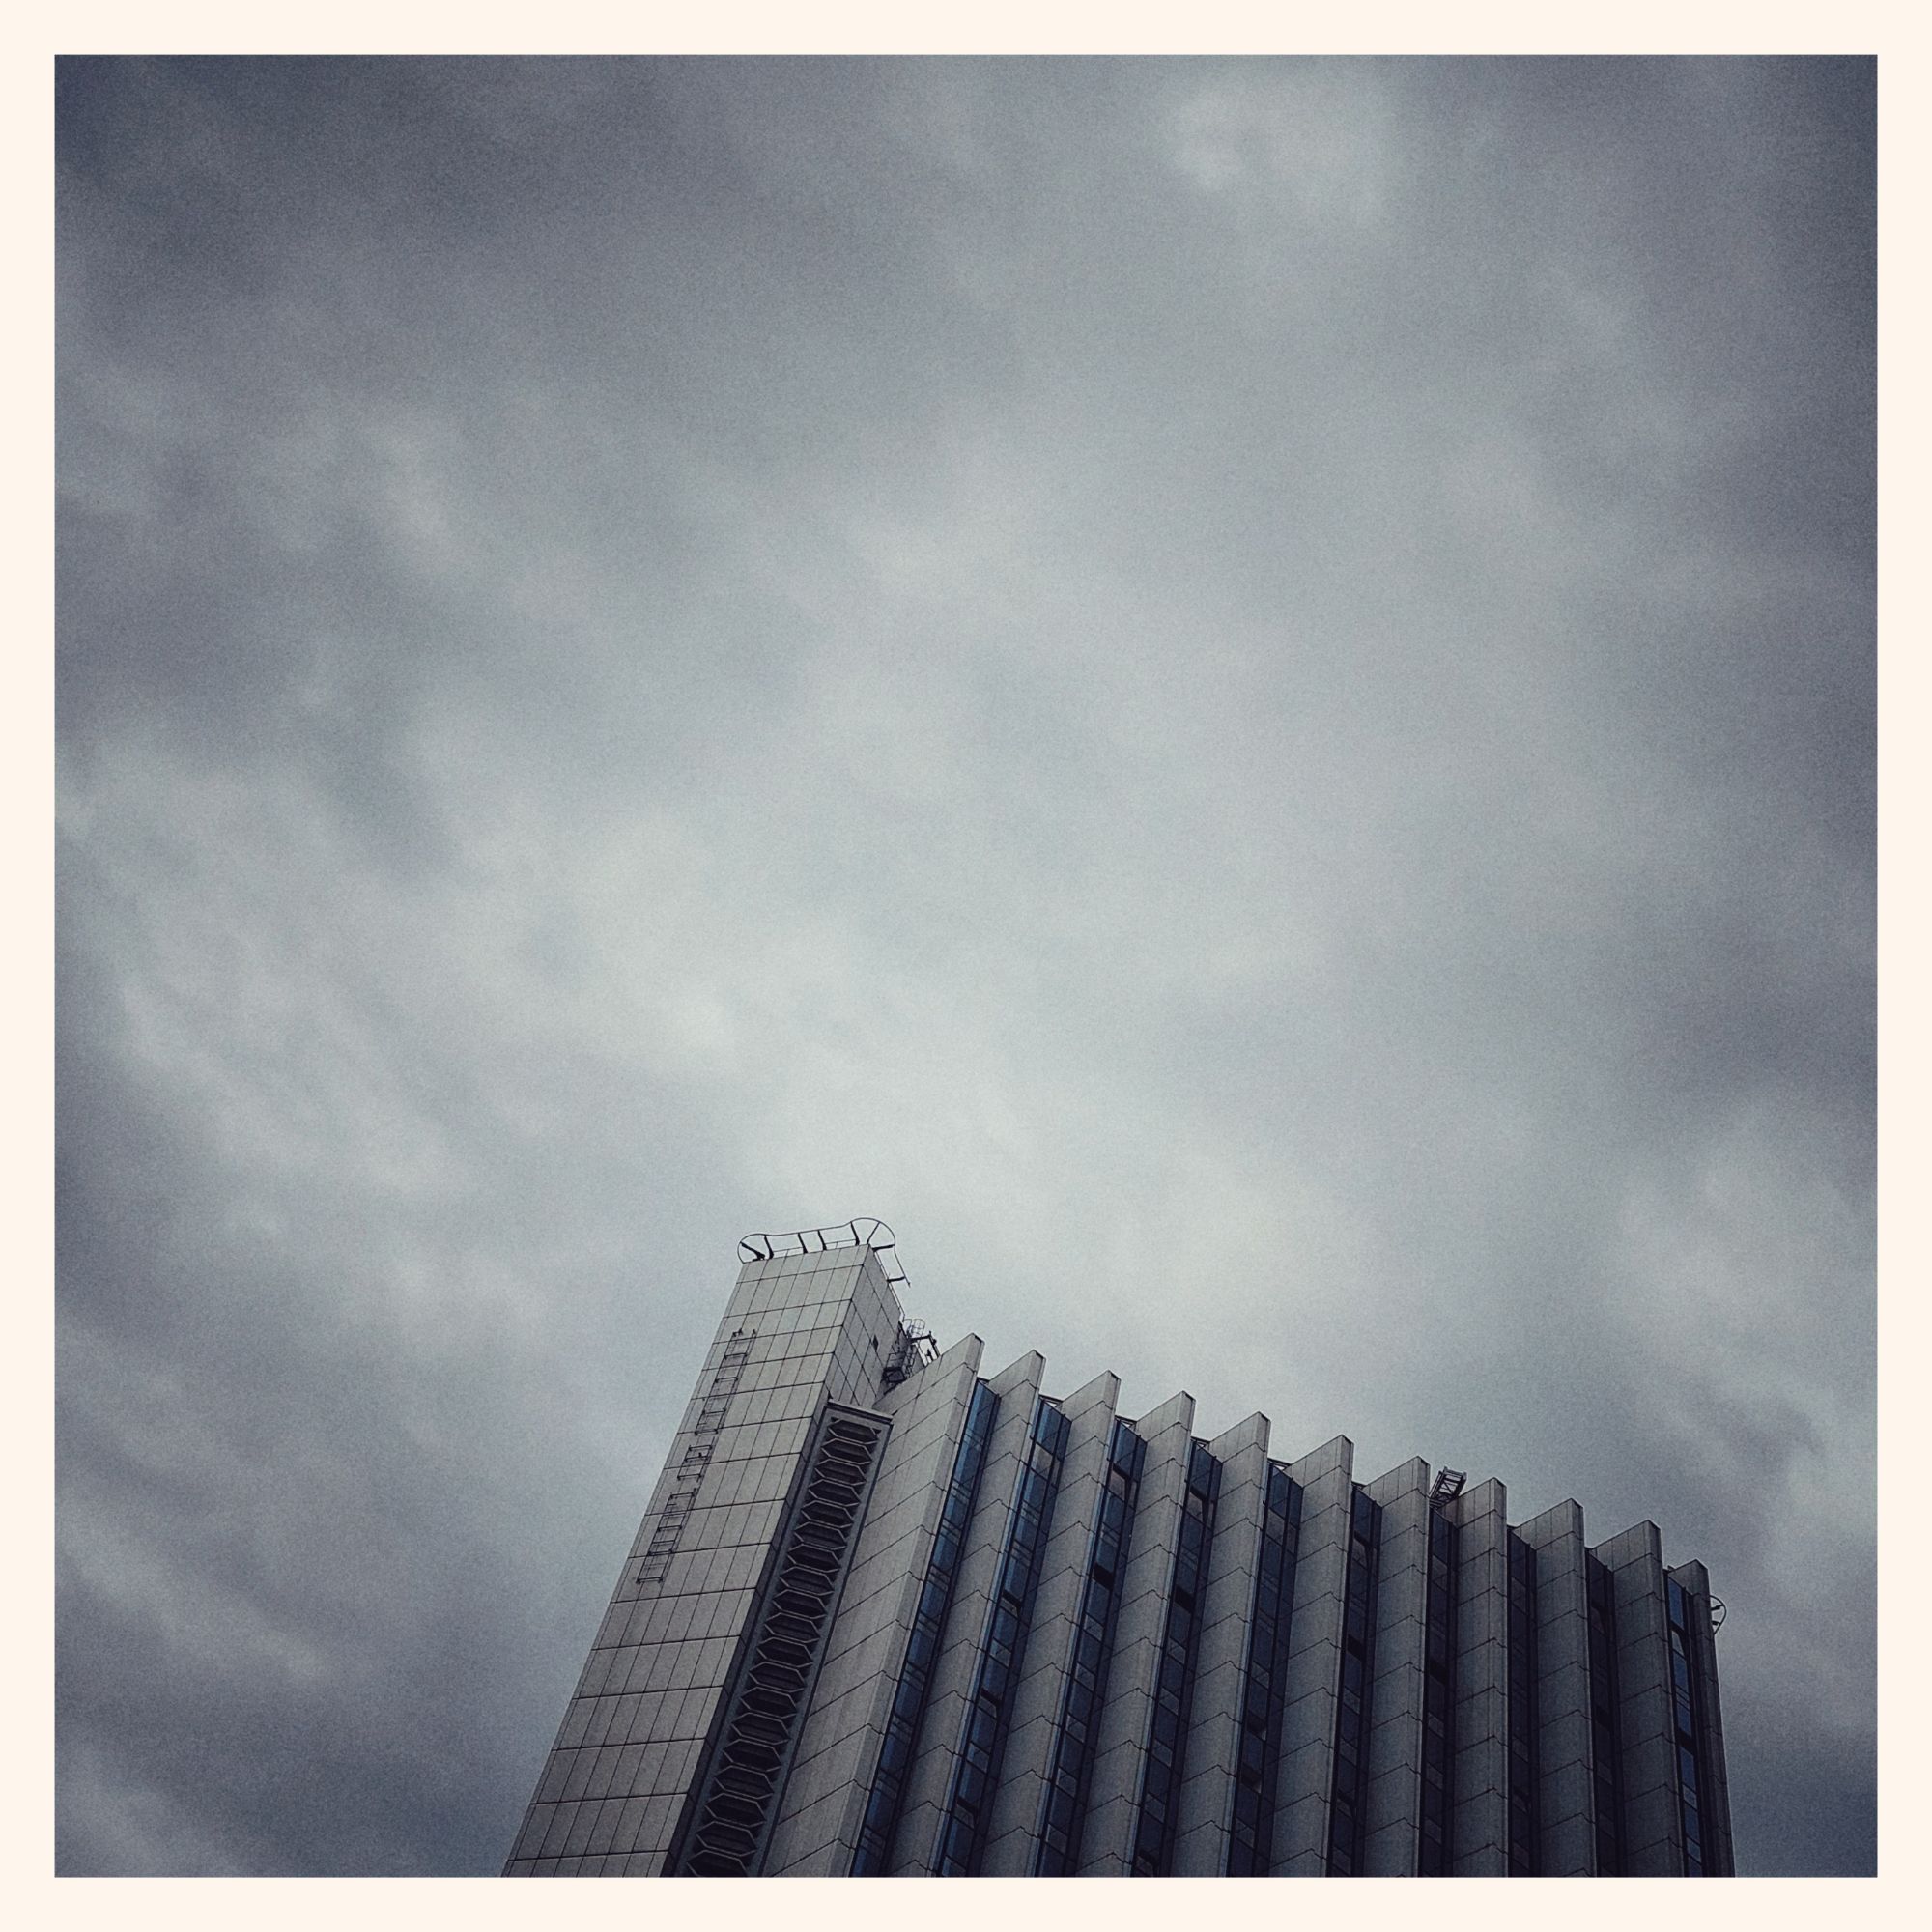 A highrise in front of a white and grey sky.